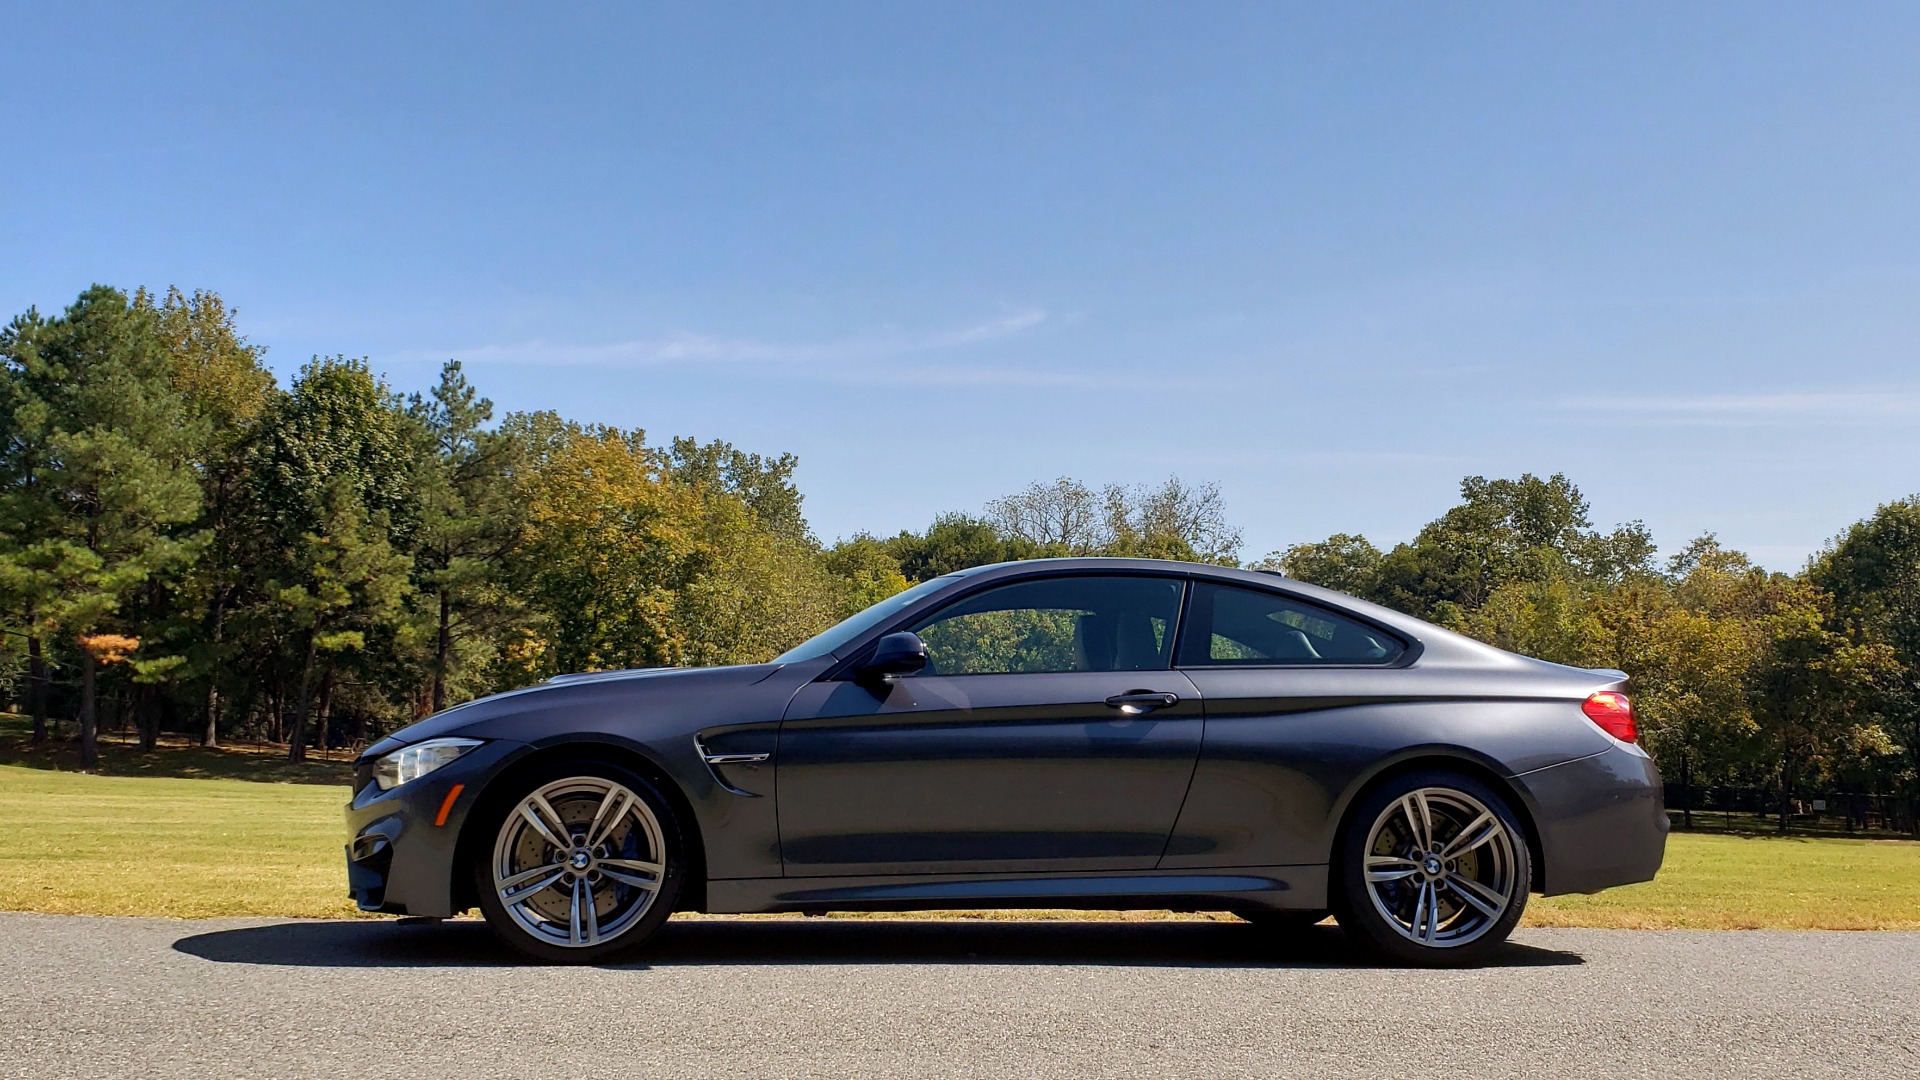 Used 2015 BMW M4 COUPE / EXEC PKG / ADAPT M SUSP / CF ROOF / NAV / REARVIEW for sale Sold at Formula Imports in Charlotte NC 28227 6